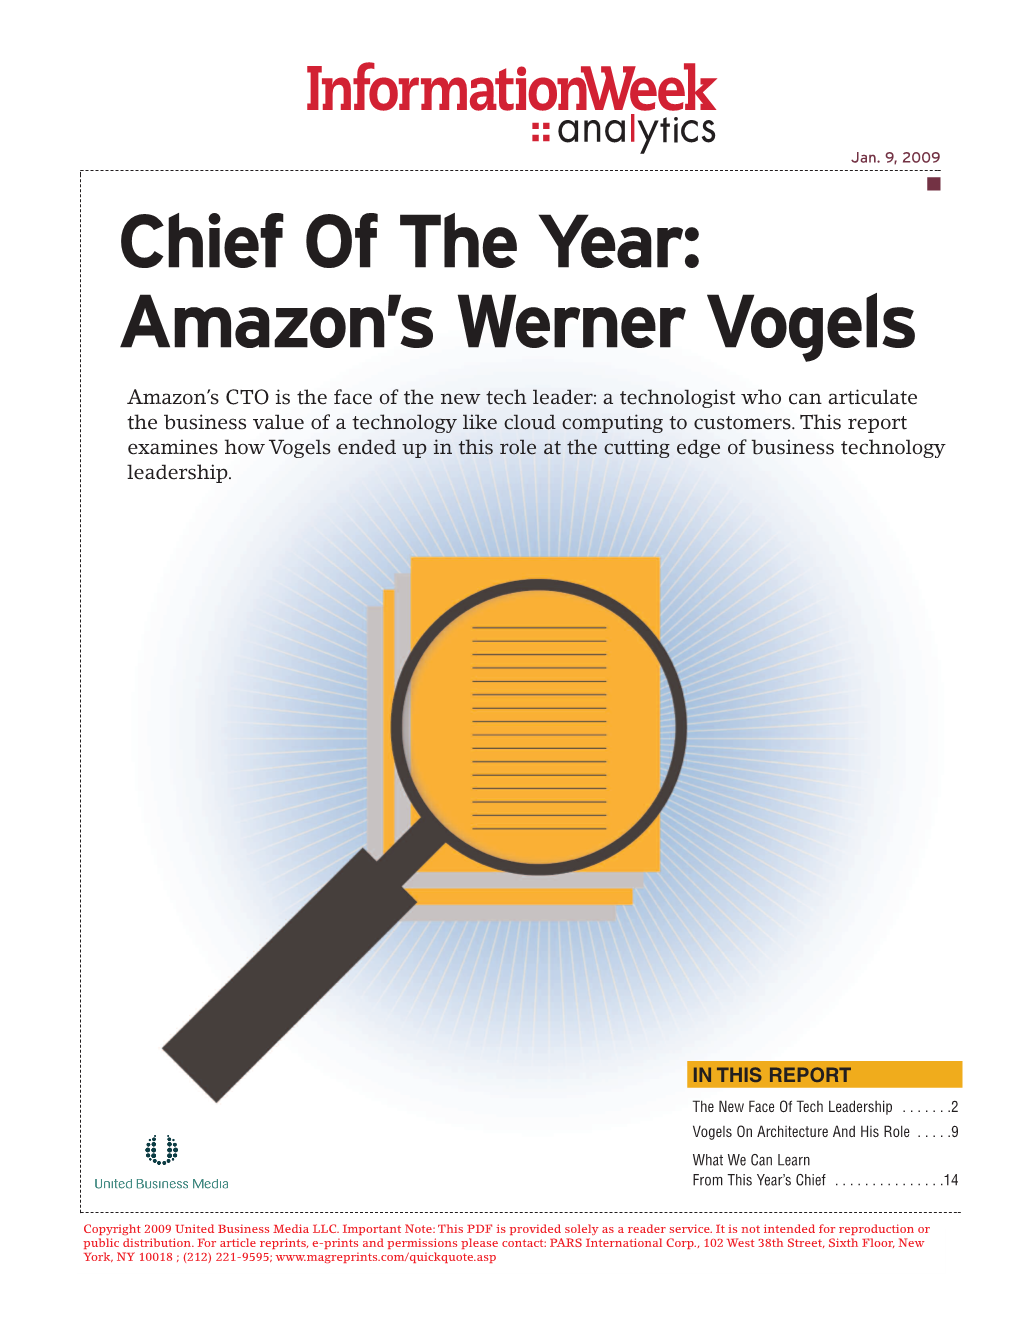 Chief of the Year: Amazon's Werner Vogels